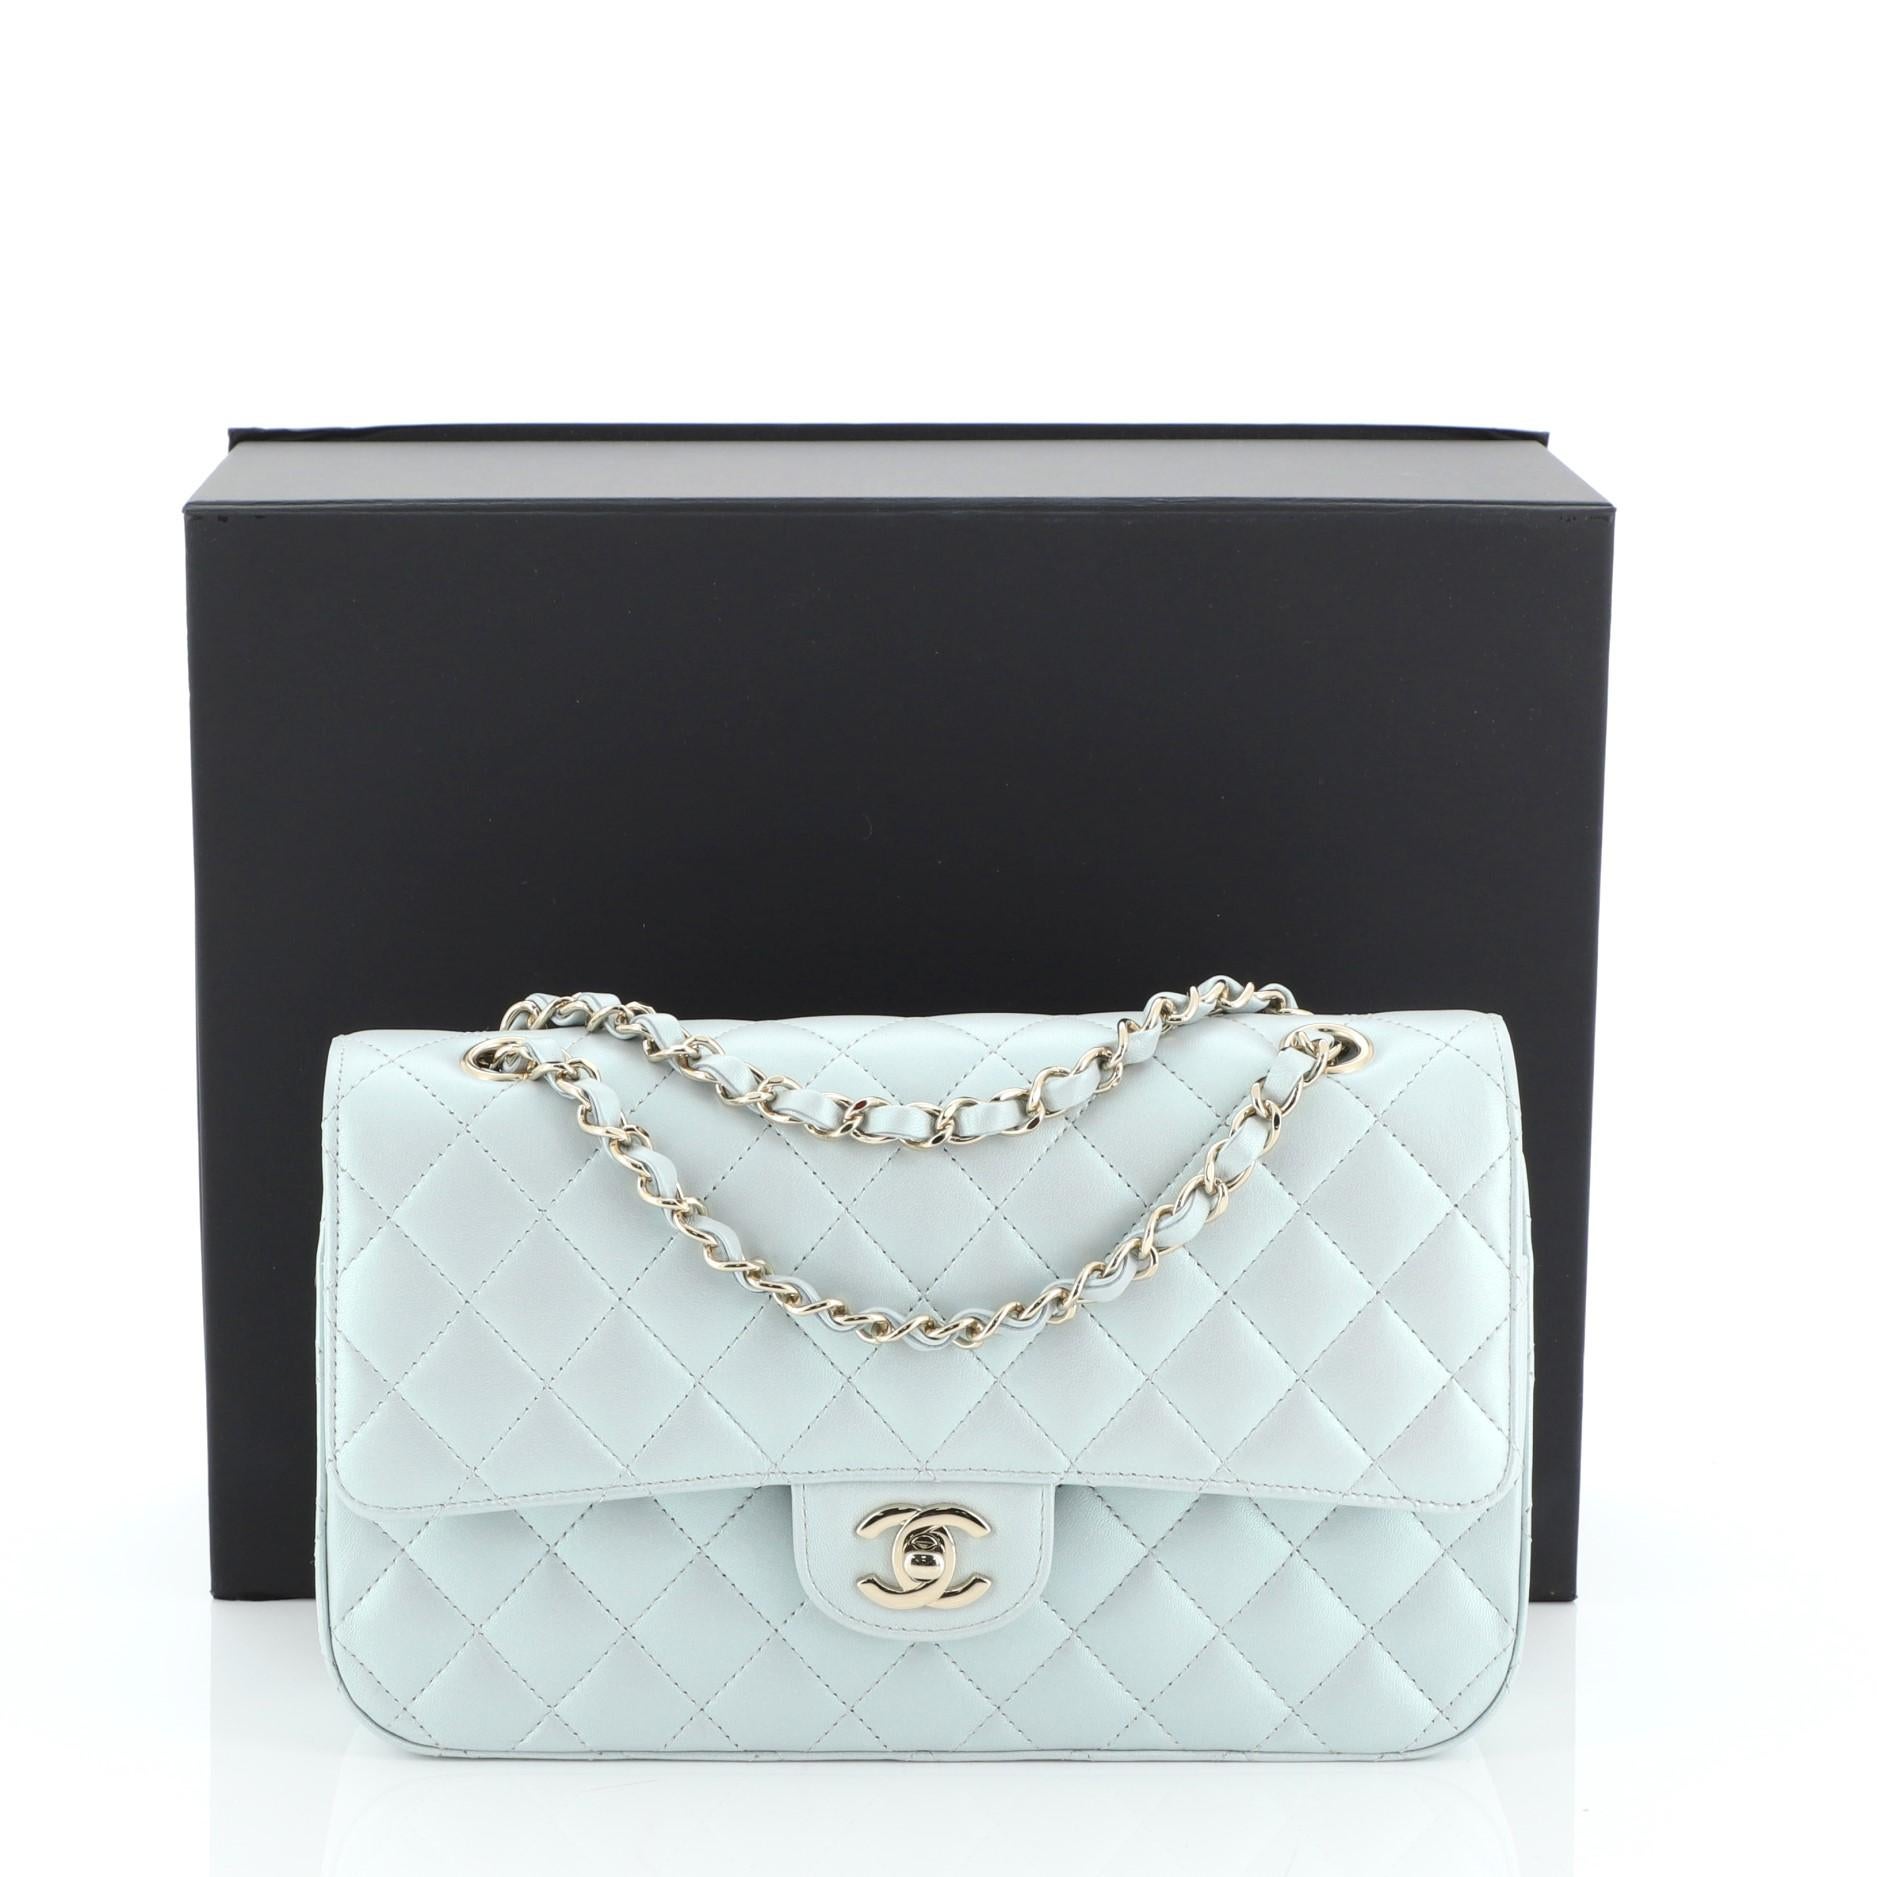 This Chanel Classic Double Flap Bag Quilted Iridescent Calfskin Medium, crafted from blue quilted iridescent calfskin leather, features woven-in leather chain strap, exterior back pocket and gold-tone hardware. Its double flap and frontal CC